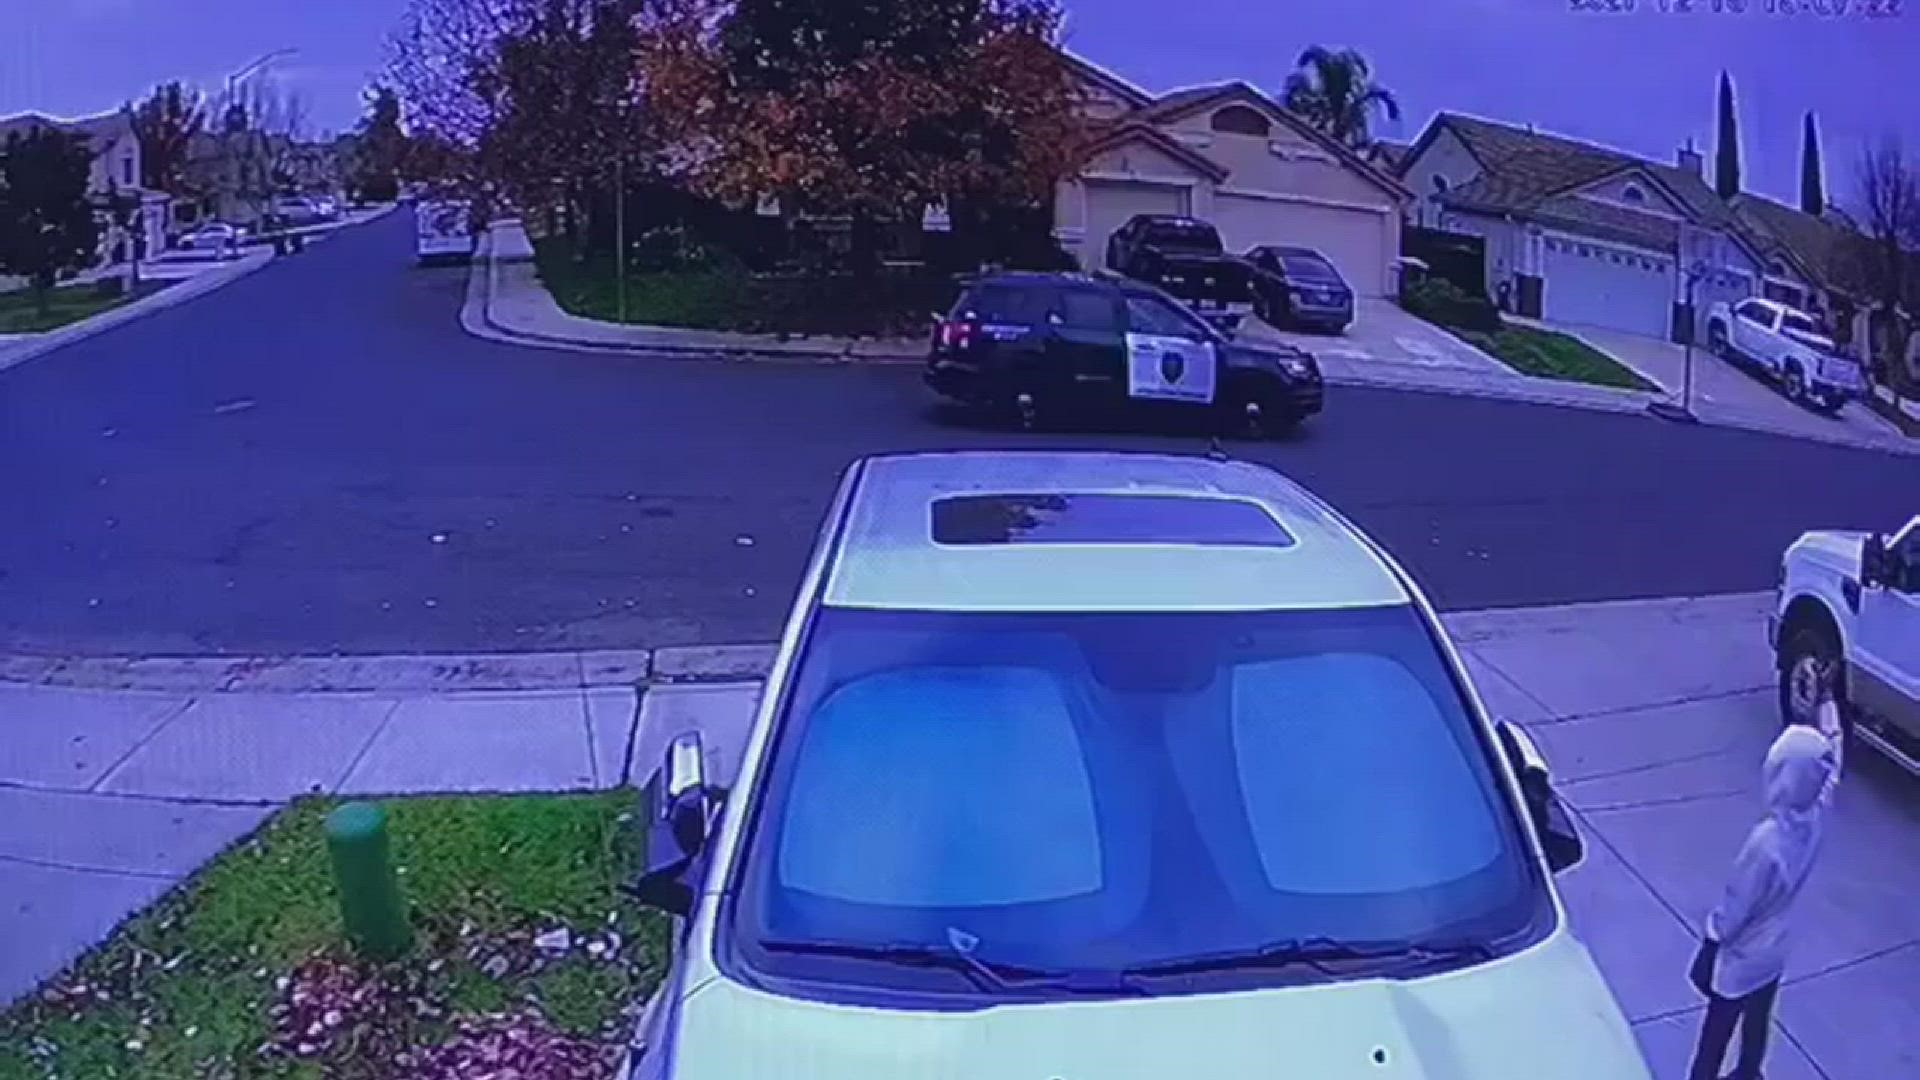 An unexpected encounter between a Stockton kid and a police officer was caught on camera ending in the officer giving the child a new skateboard.